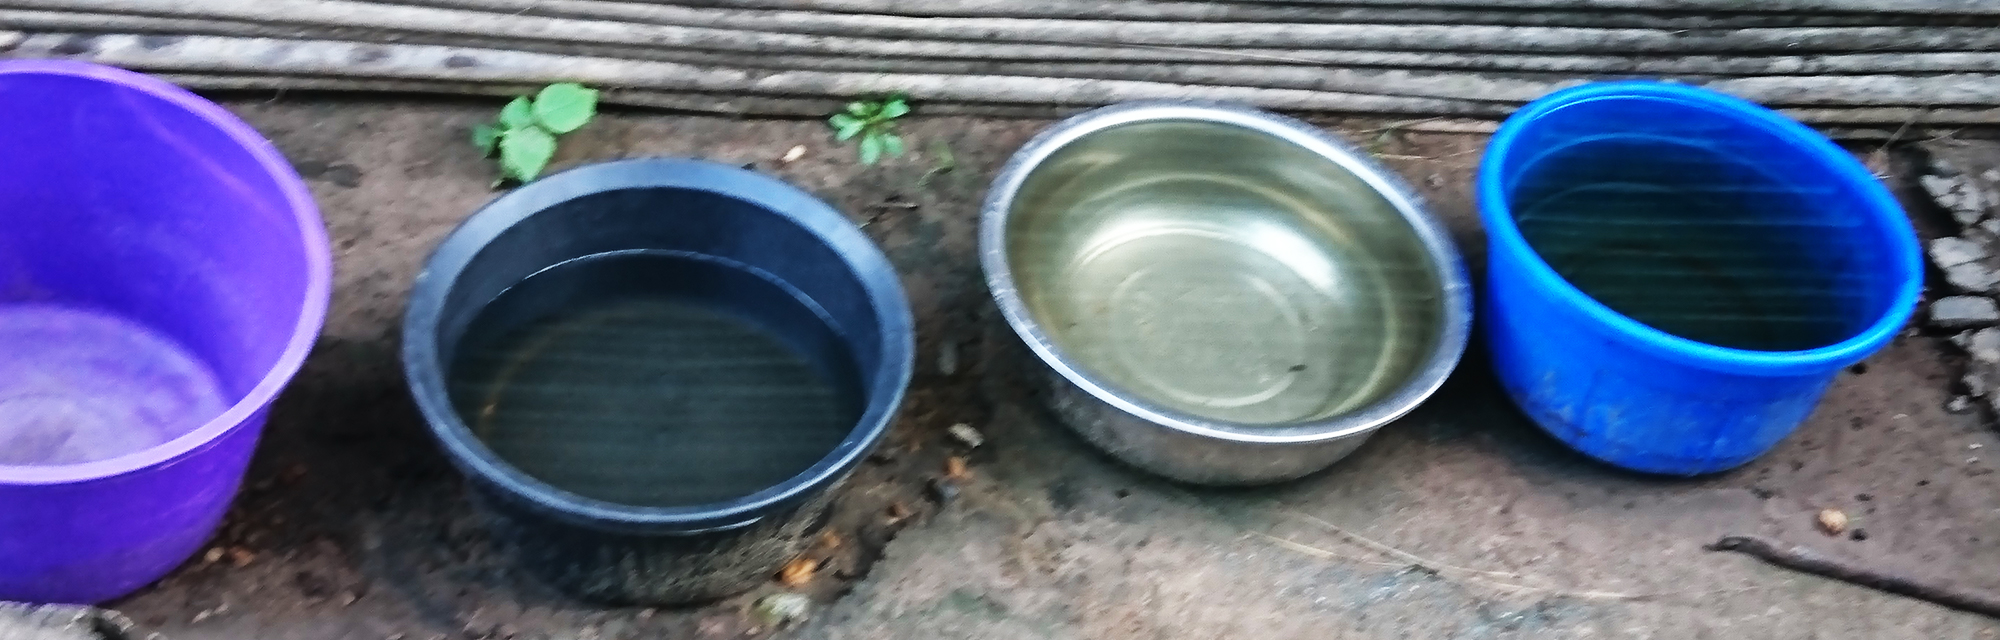 Rain water collected in pans